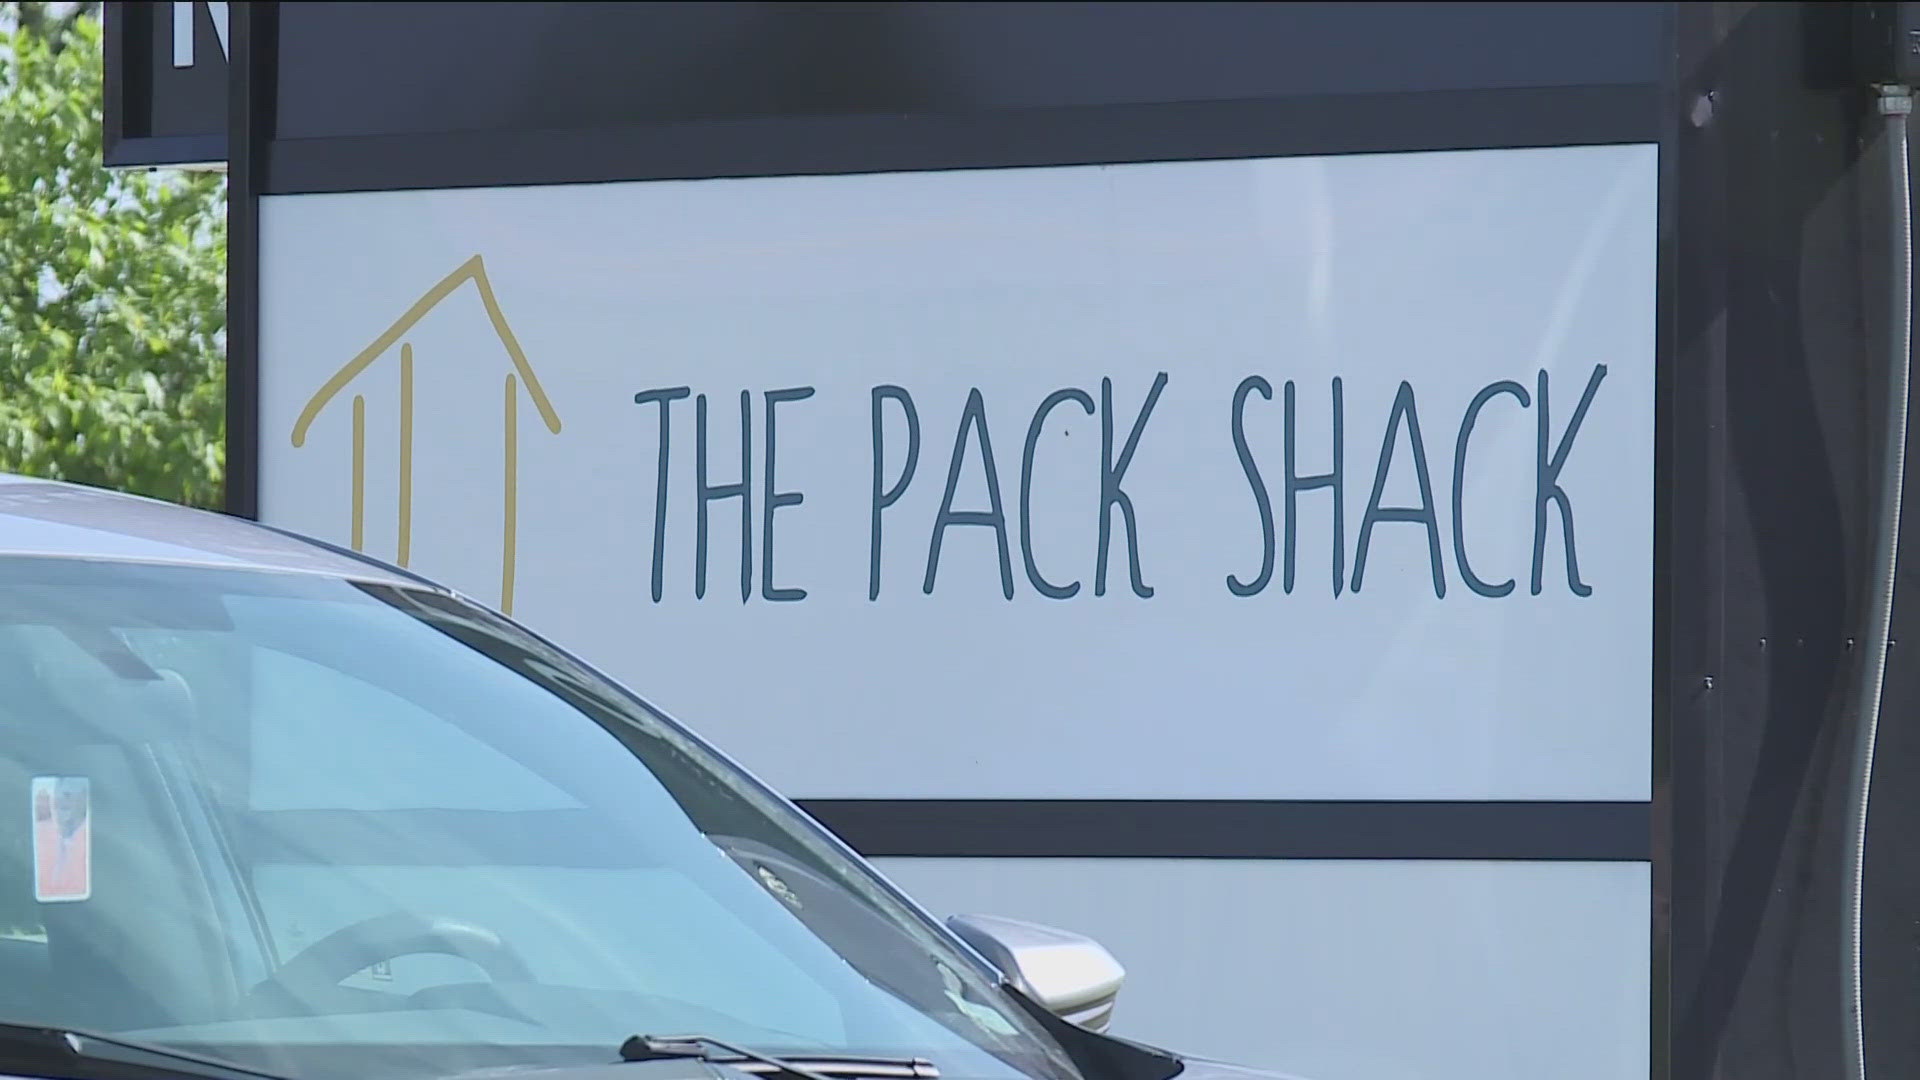 5NEWS had the chance to see what Pack Shack is all about when Kit Brown and his team from Ghirardelli invited them to join a feed-the-funnel.